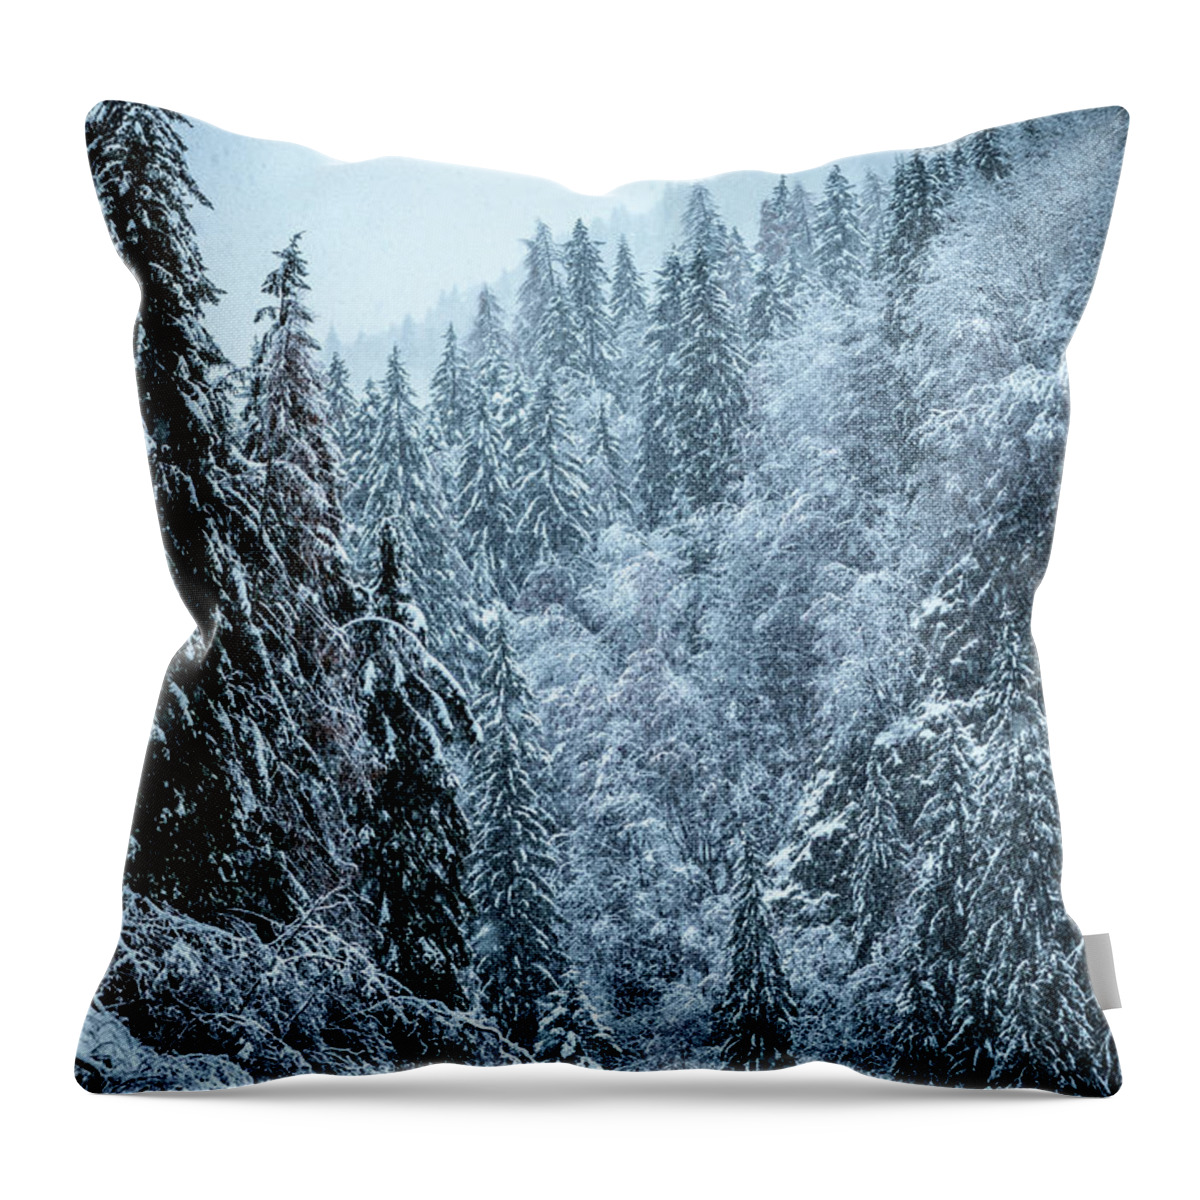 Snow Throw Pillow featuring the photograph Italian Alps Snowing Winter Scene by Ilbusca